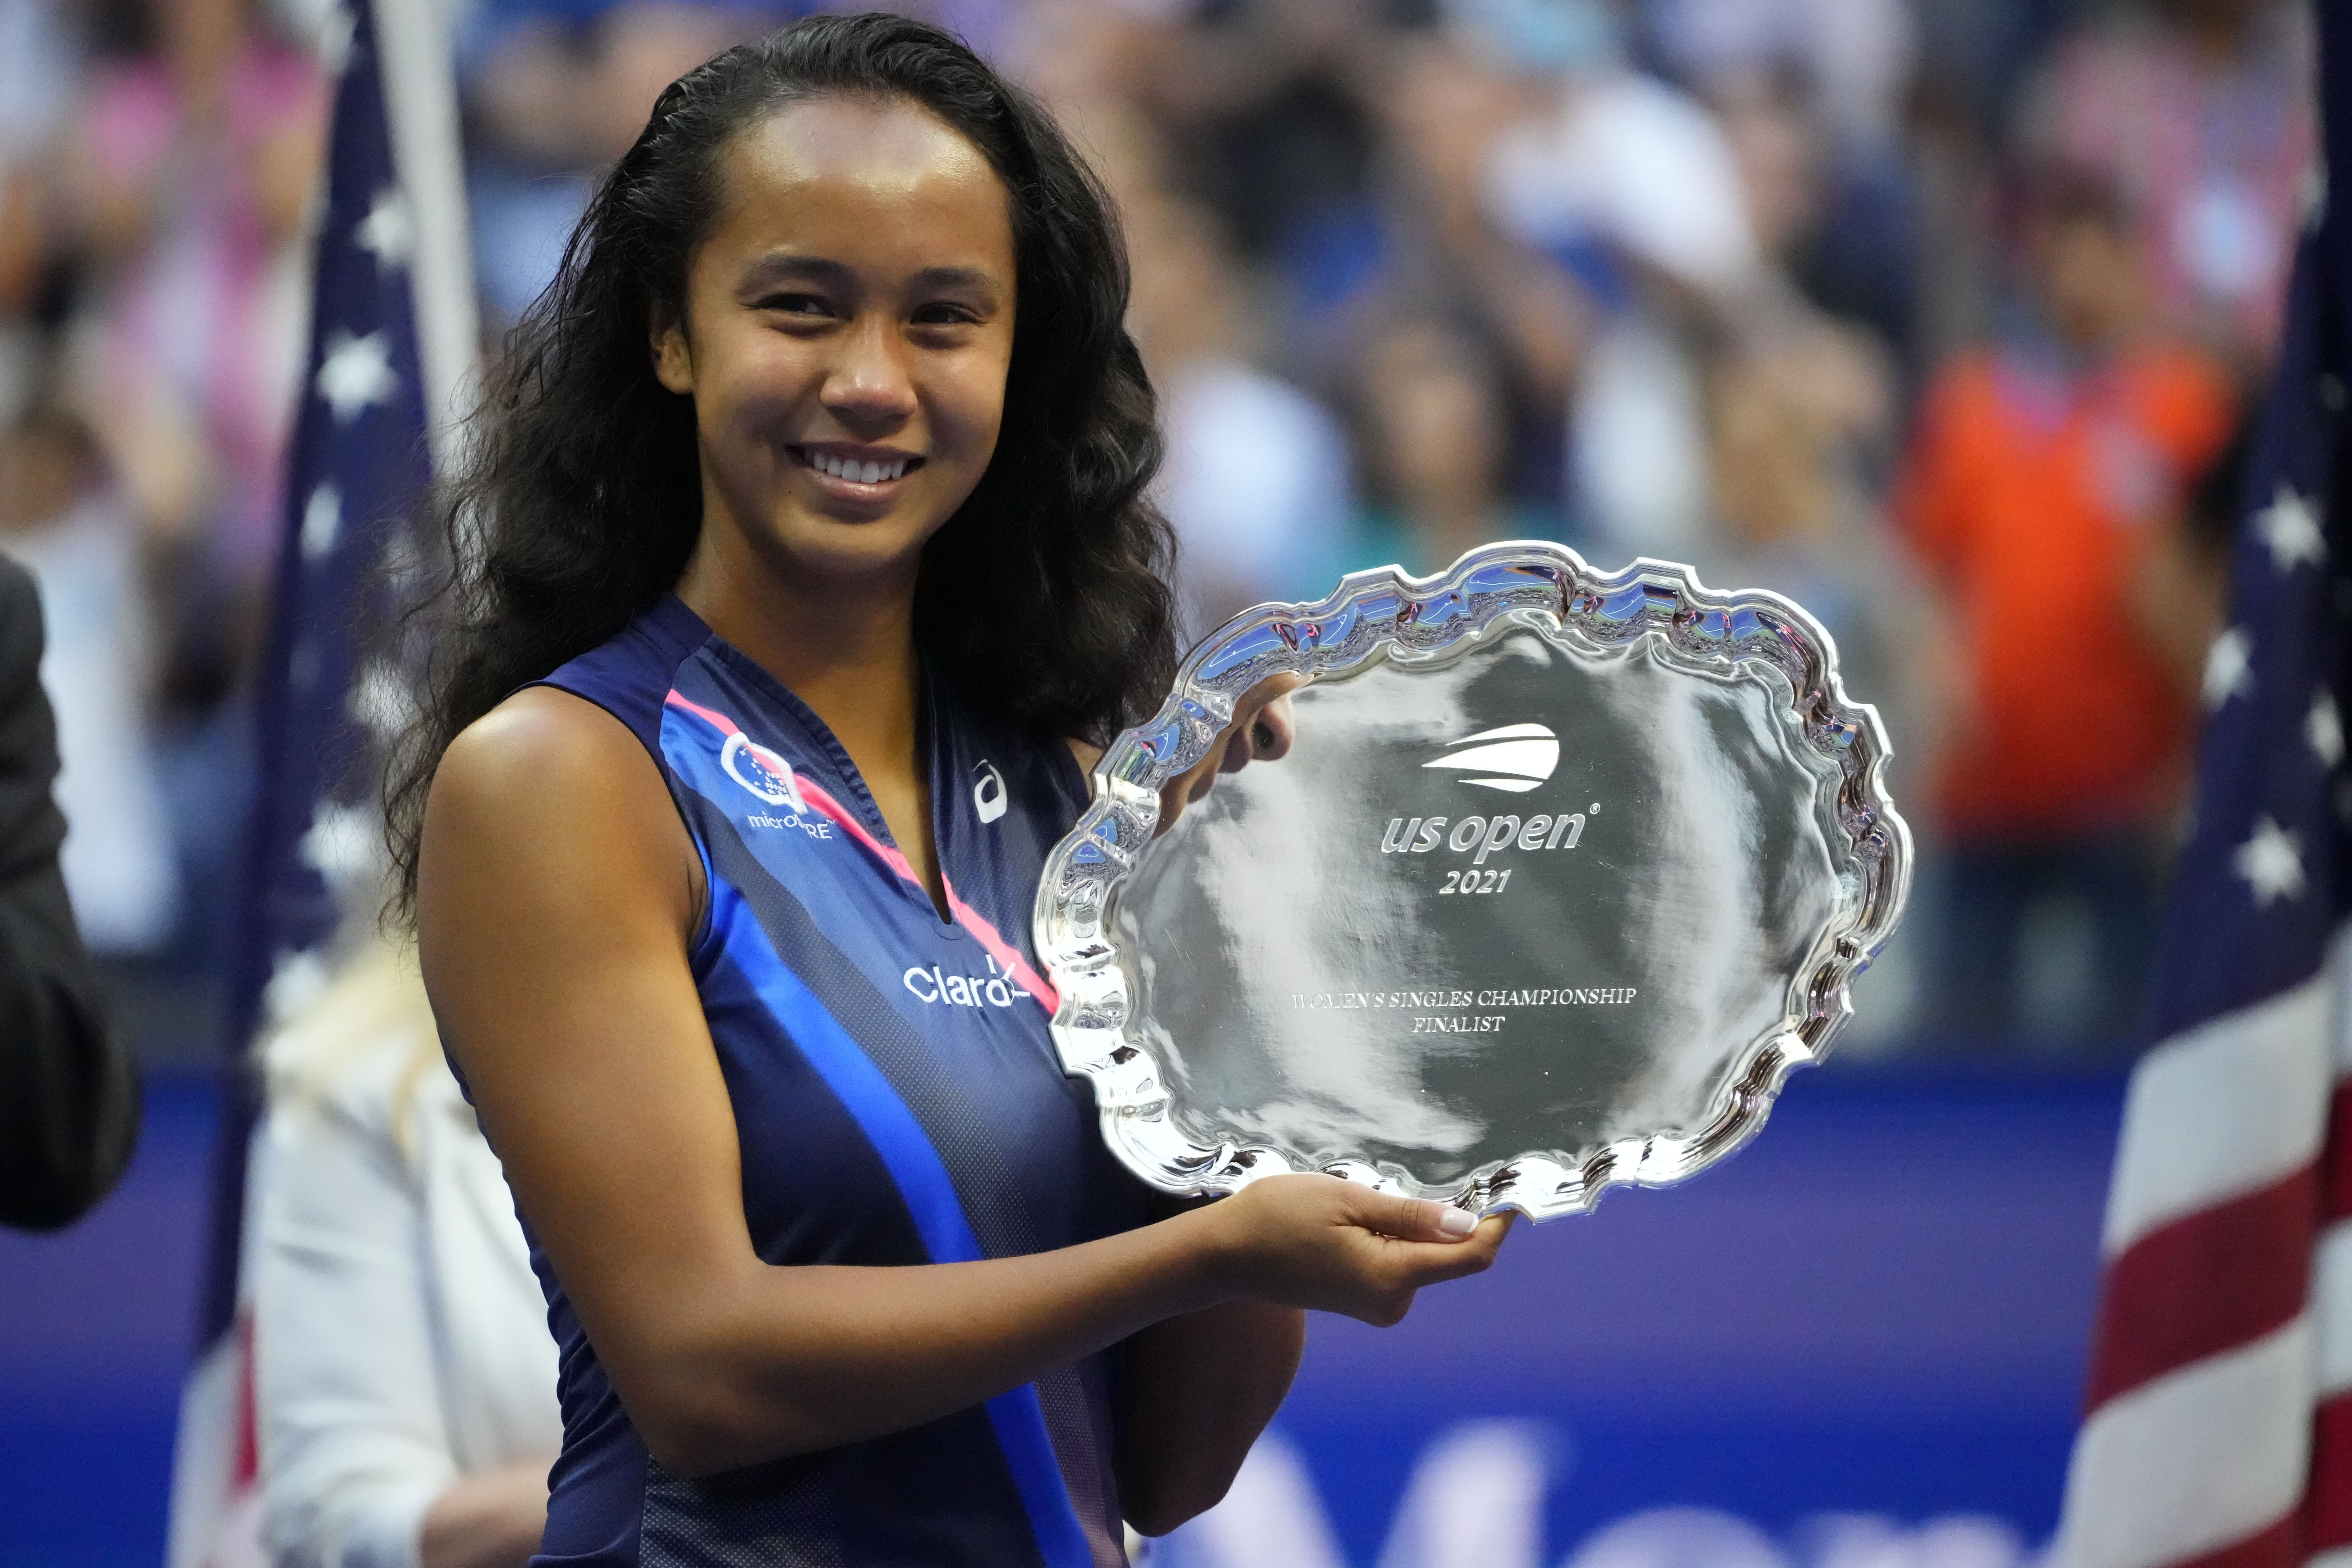 Sep 11, 2021; Flushing, NY, USA; Leylah Fernandez of Canada holds the finalist trophy after her match against Emma Raducanu of Great Britain (not pictured) in the women's singles final on day thirteen of the 2021 U.S. Open tennis tournament at USTA Billie Jean King National Tennis Center. Mandatory Credit: Robert Deutsch-USA TODAY Sports